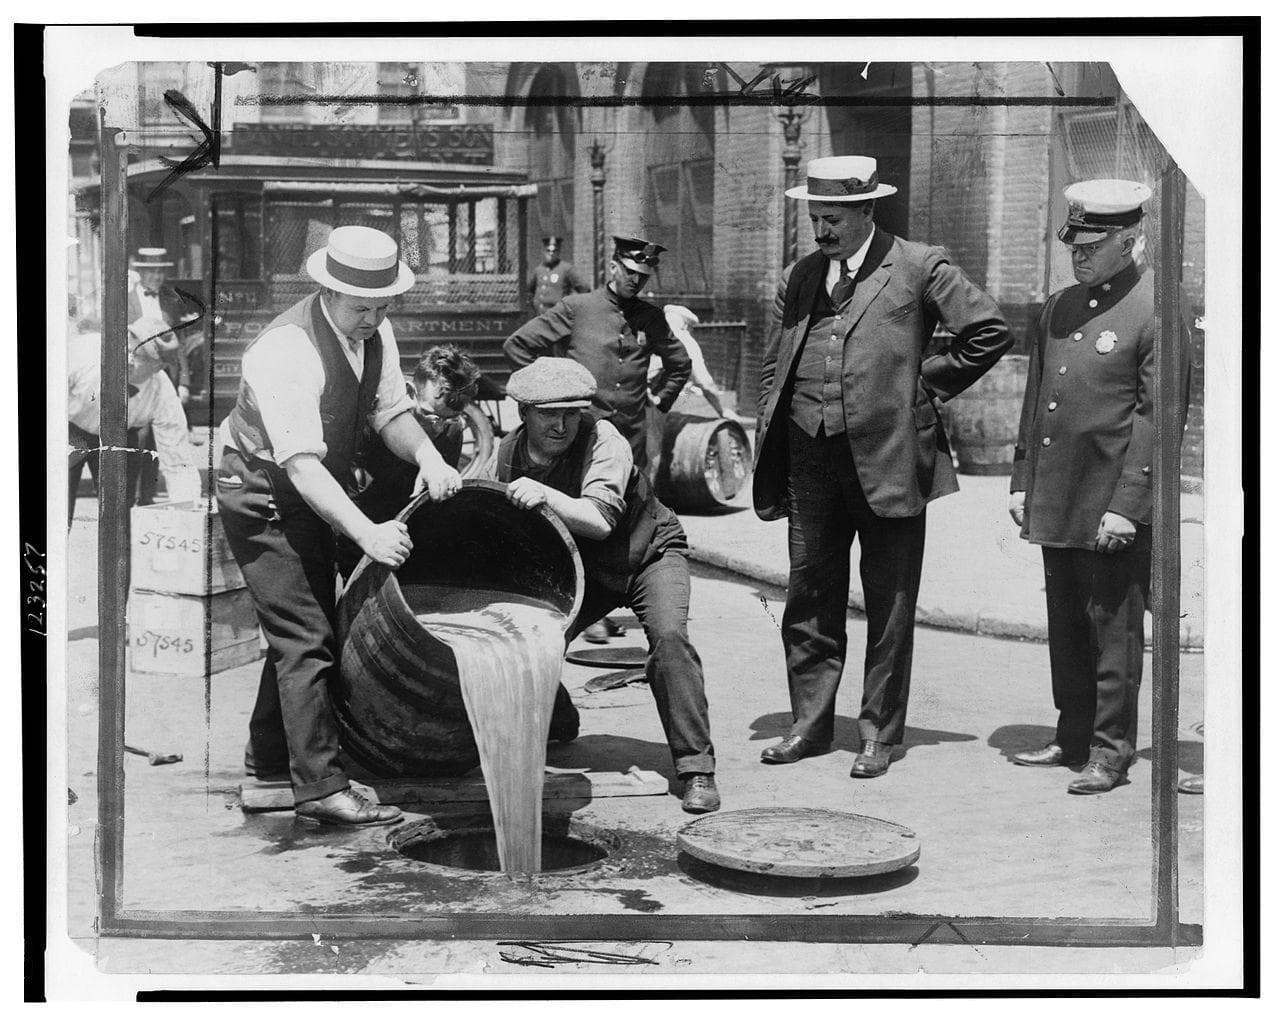 Random Most Fascinating and Bizarre Parts of Daily Life in 1920s New York City